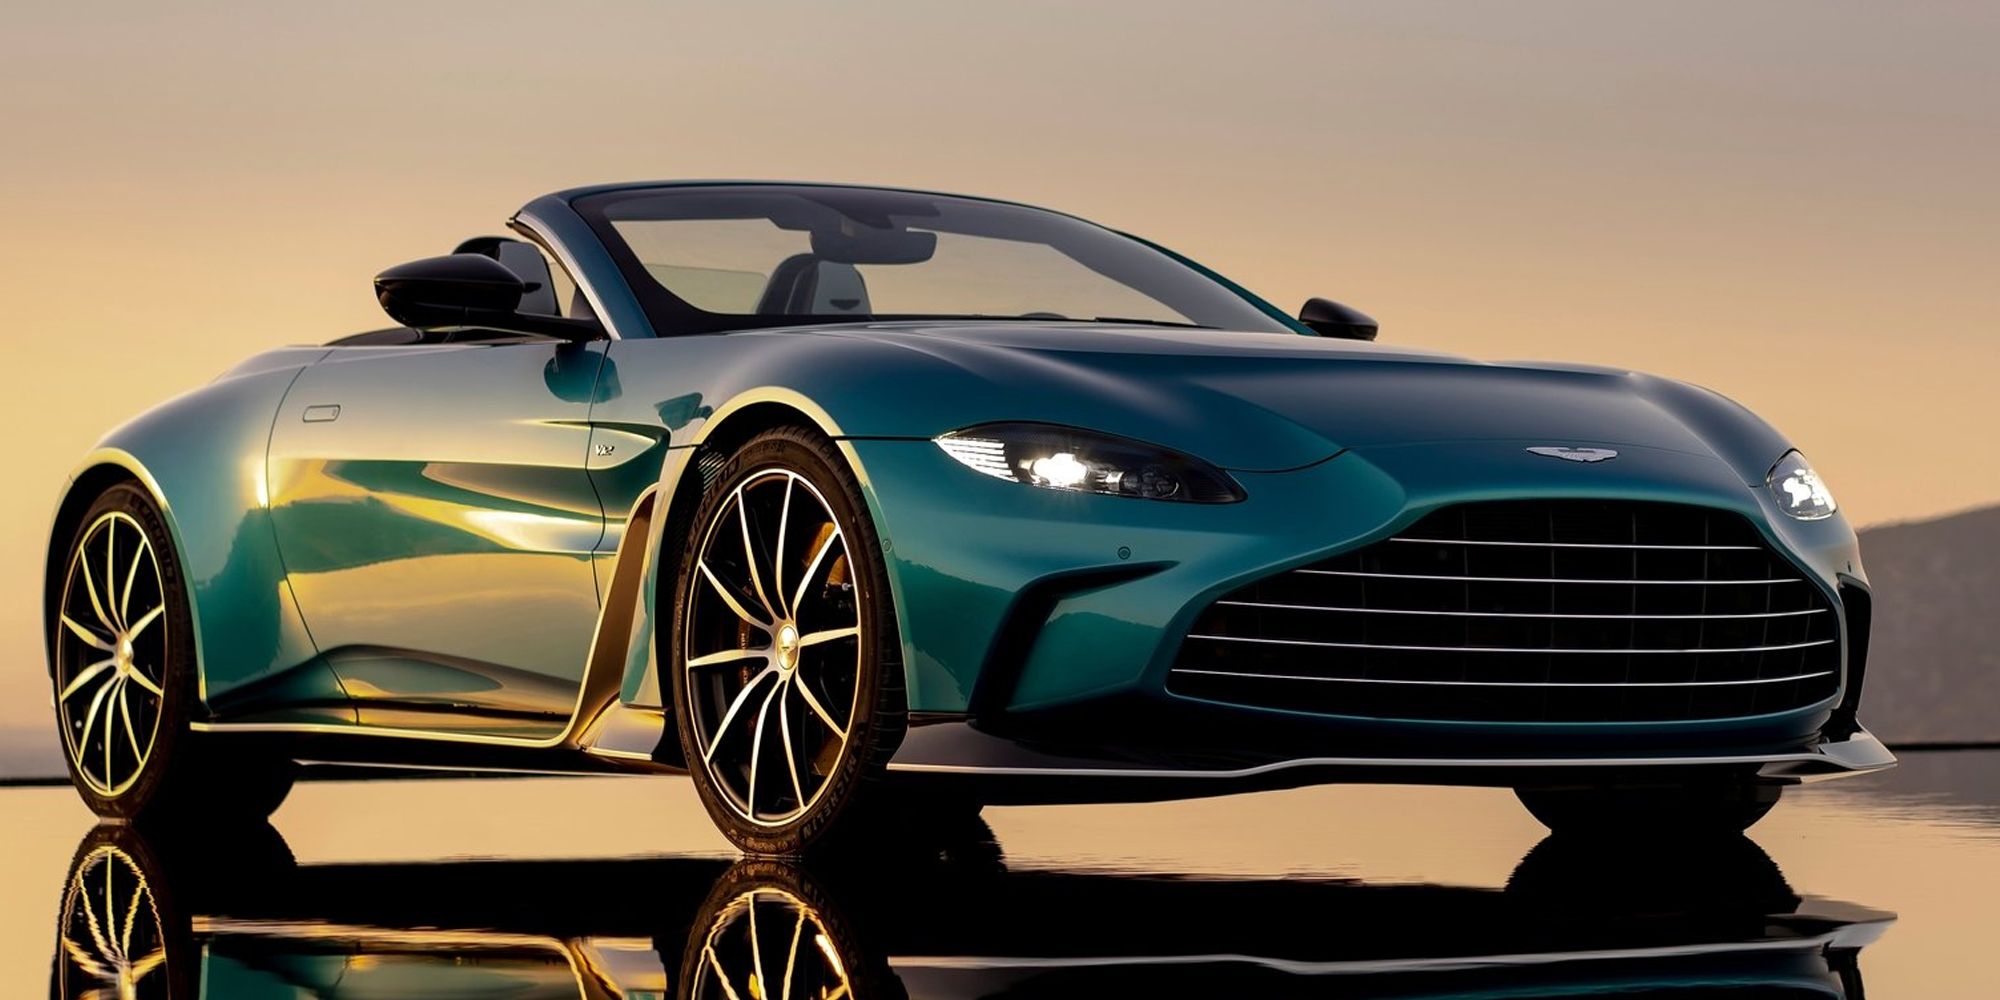 10 Reasons Why Driving Enthusiasts Should Consider An Aston Martin Vantage